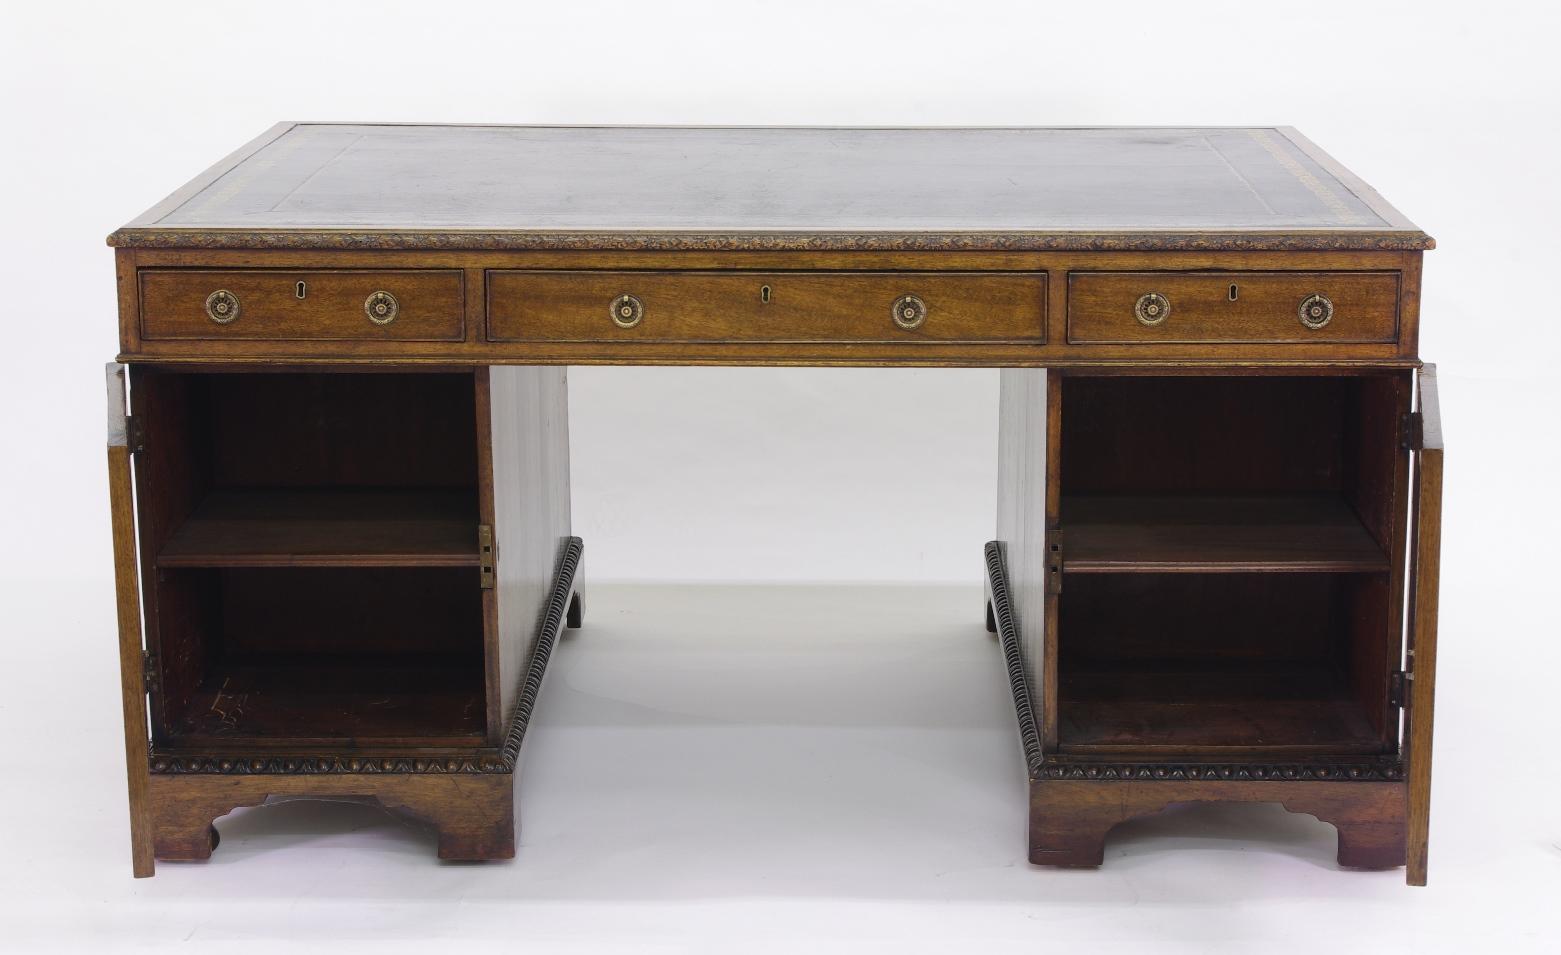 Victorian Mahogany Partners Desk, circa 1840-1860 In Good Condition For Sale In St. Louis, MO